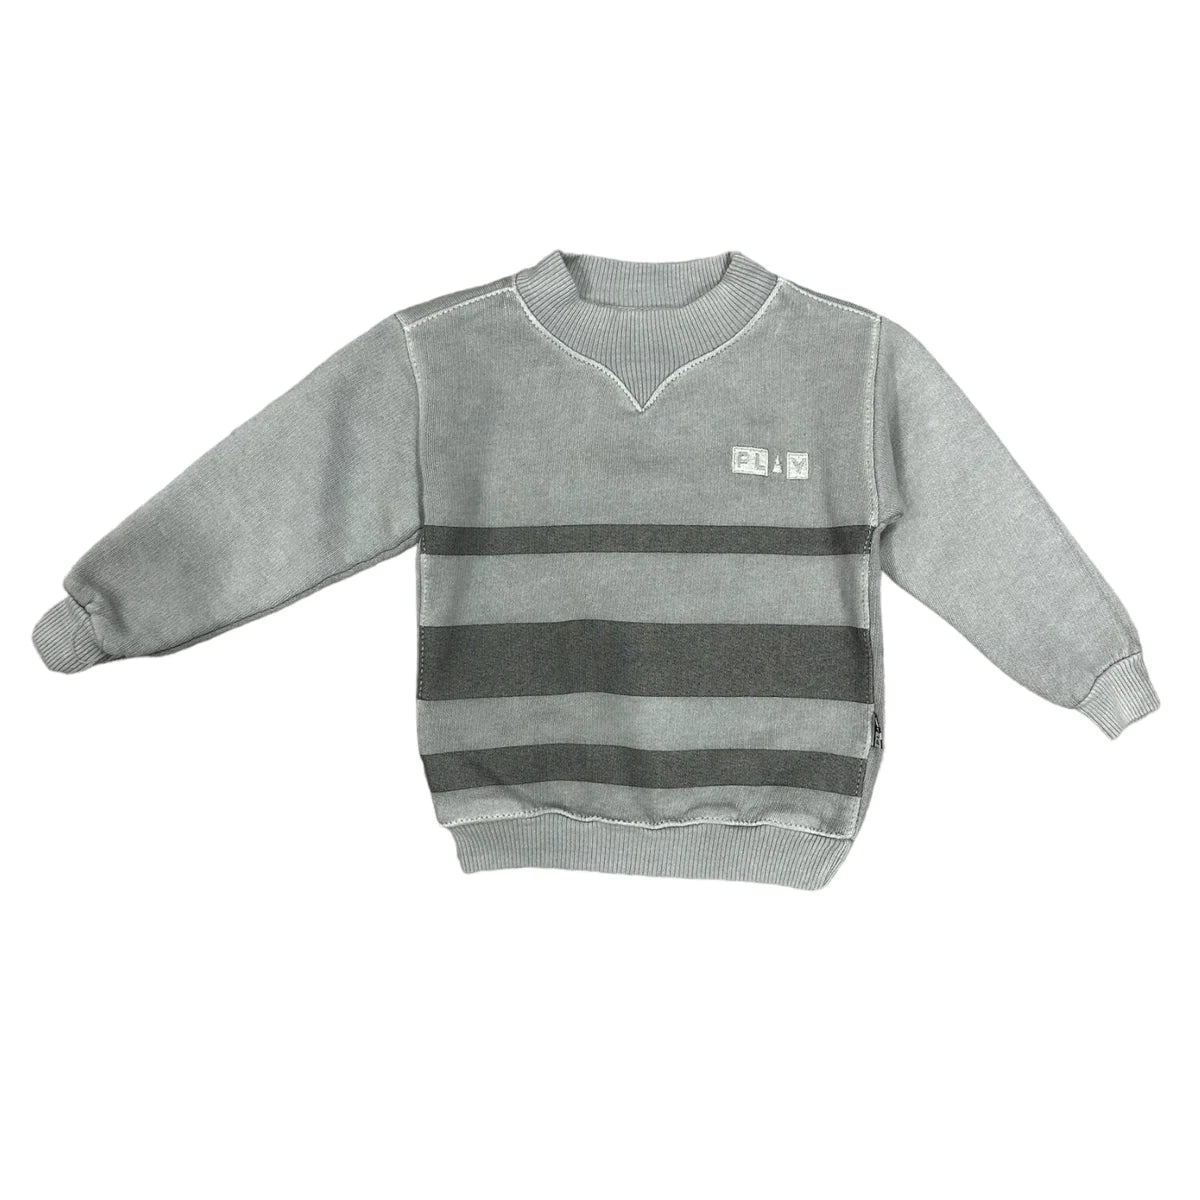 Play Terrible Twos Sweater - Stripe Nature Grey